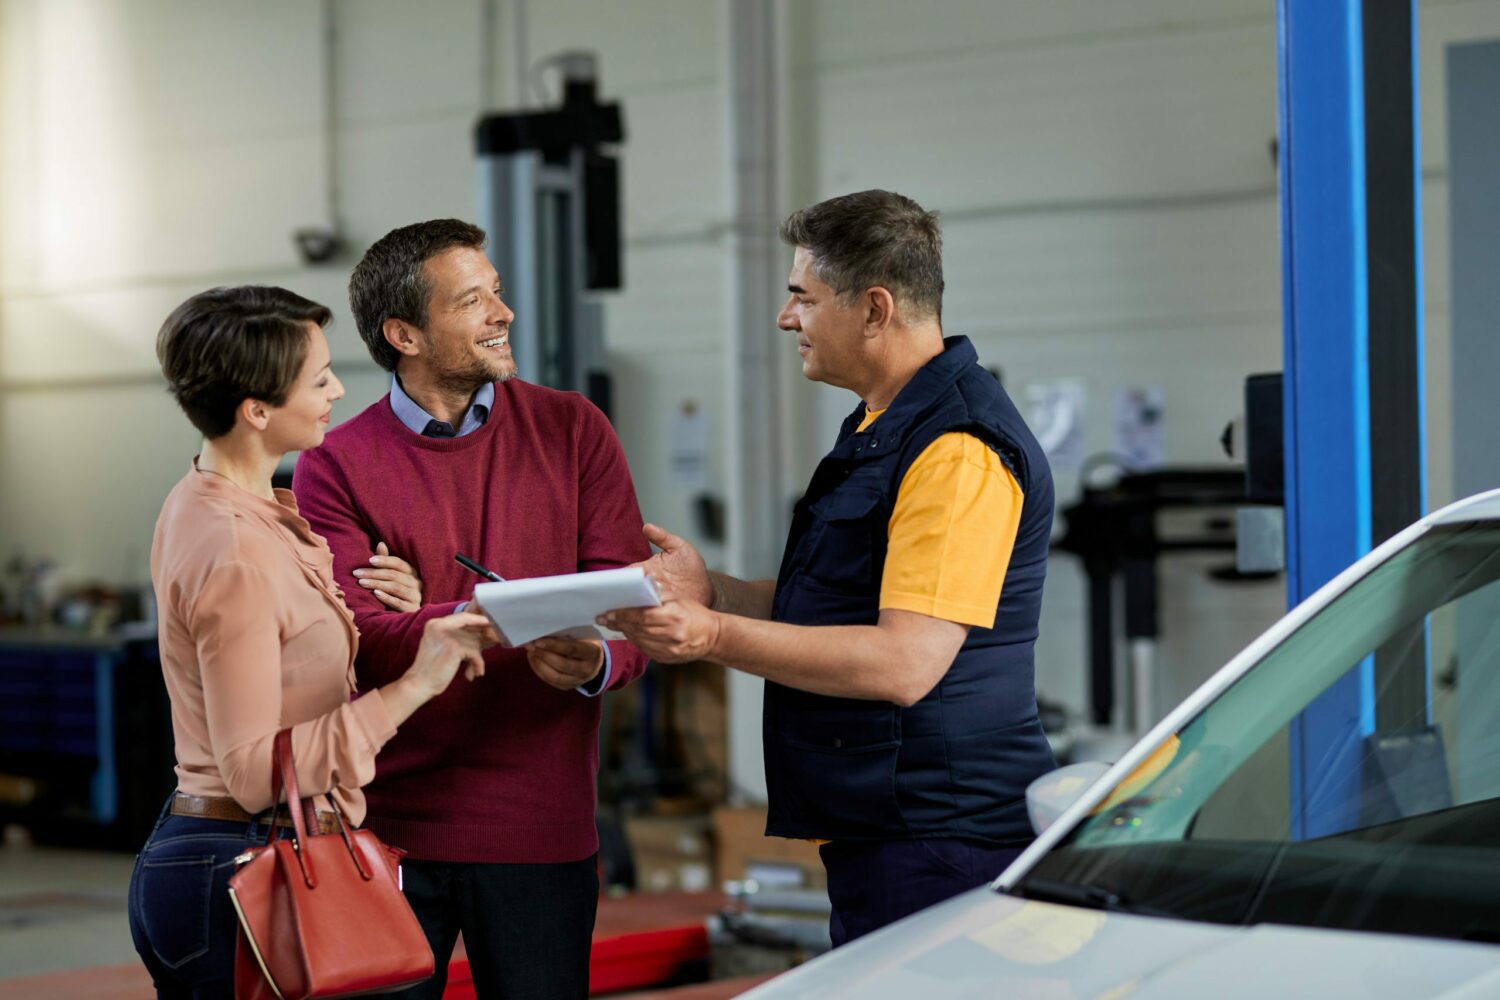 Recall work is a great opportunity for your dealership to impress customers with the smooth operations of a well-oiled service department.